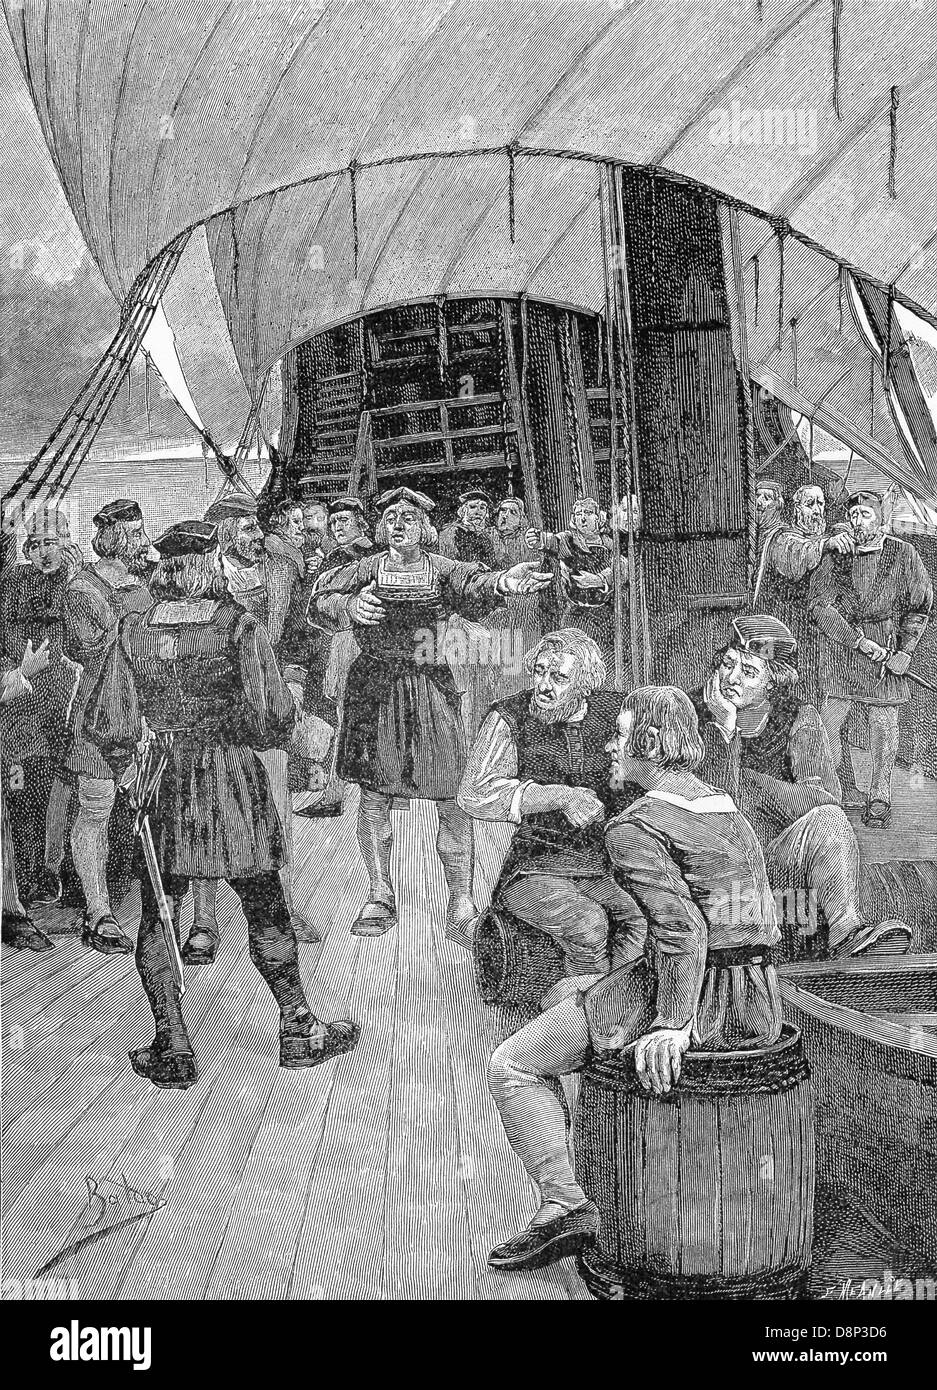 Columbus addresses his crew after hearing that some members, disgruntled at such a long voyage, plot mutiny. Stock Photo